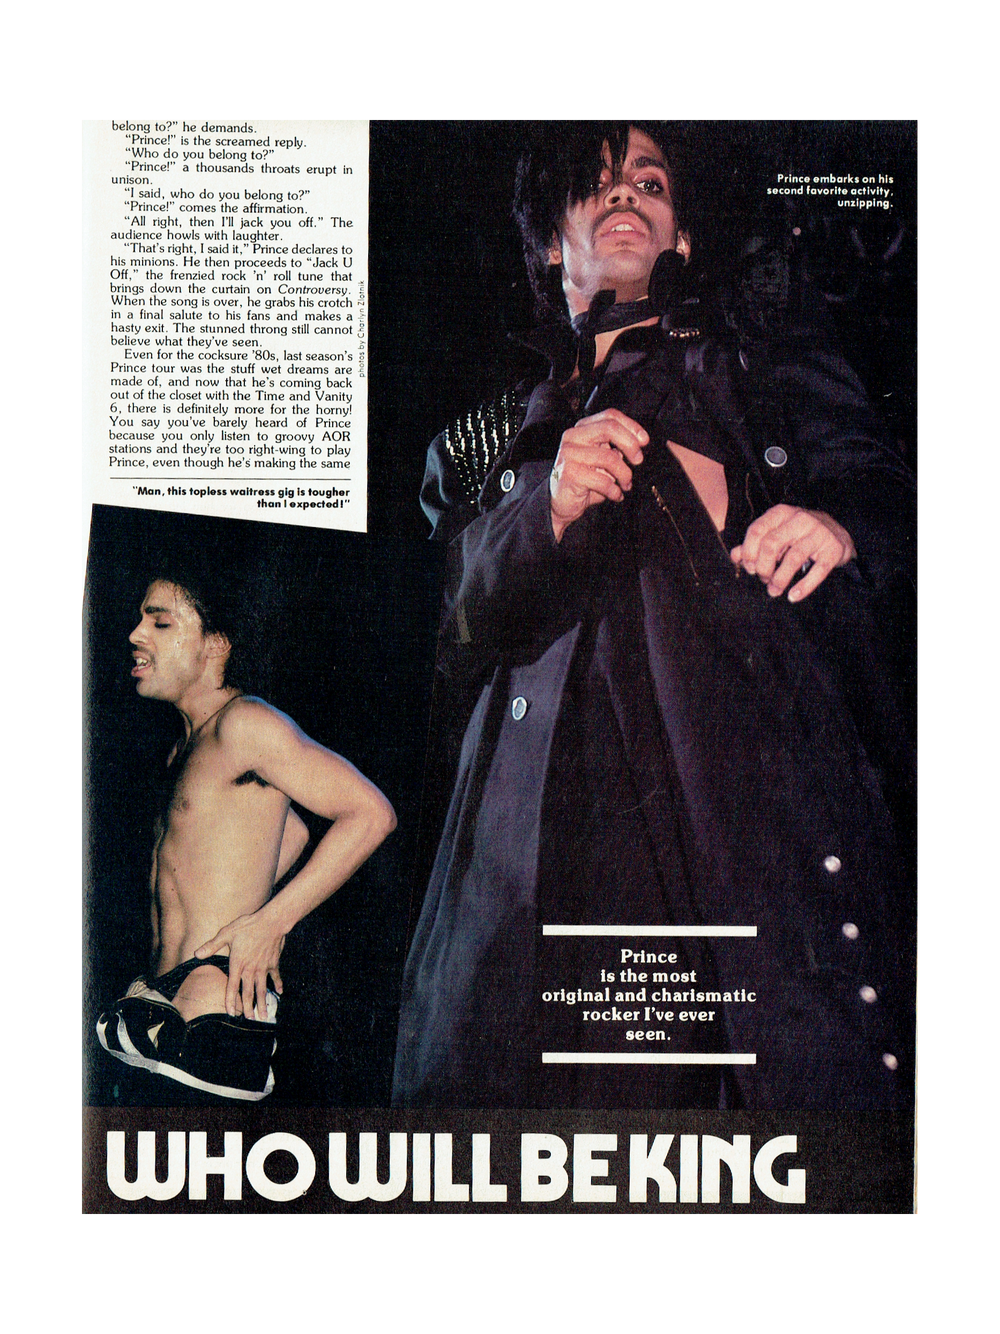 Prince Cream Magazine May 1983 Prince Cover & 3 Page Article